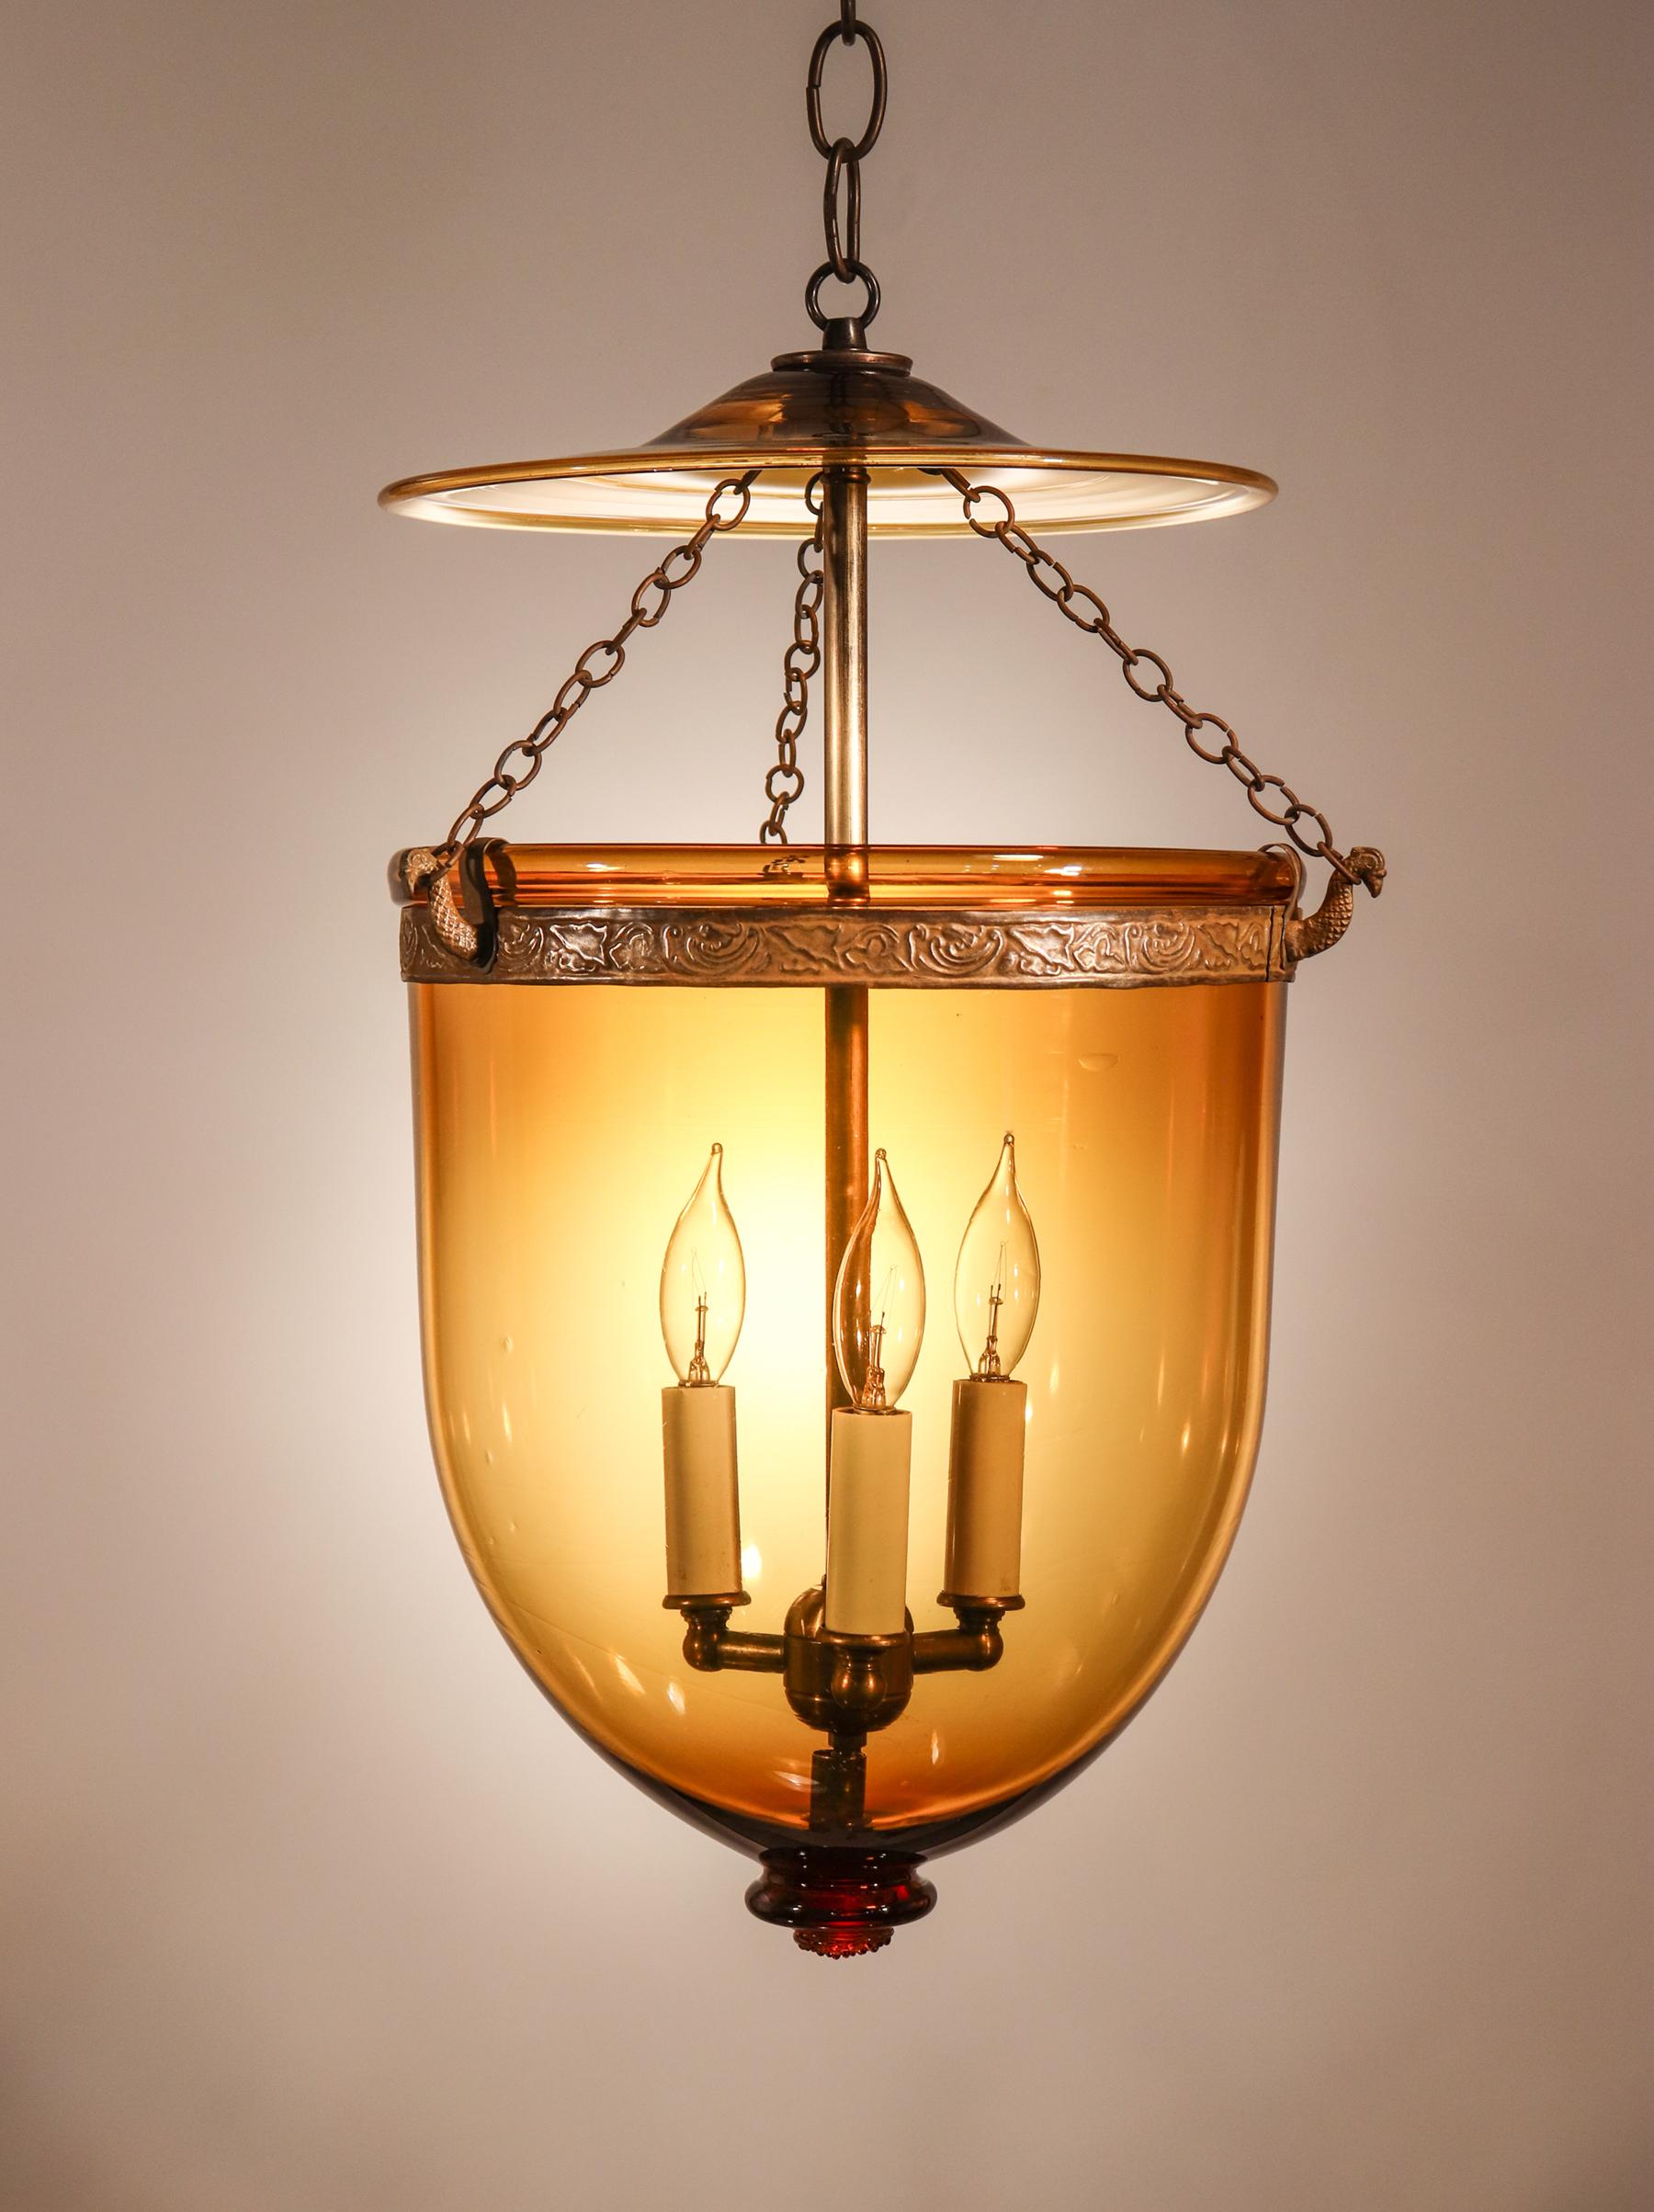 High Victorian Antique Bell Jar Lantern with Amber Colored Glass